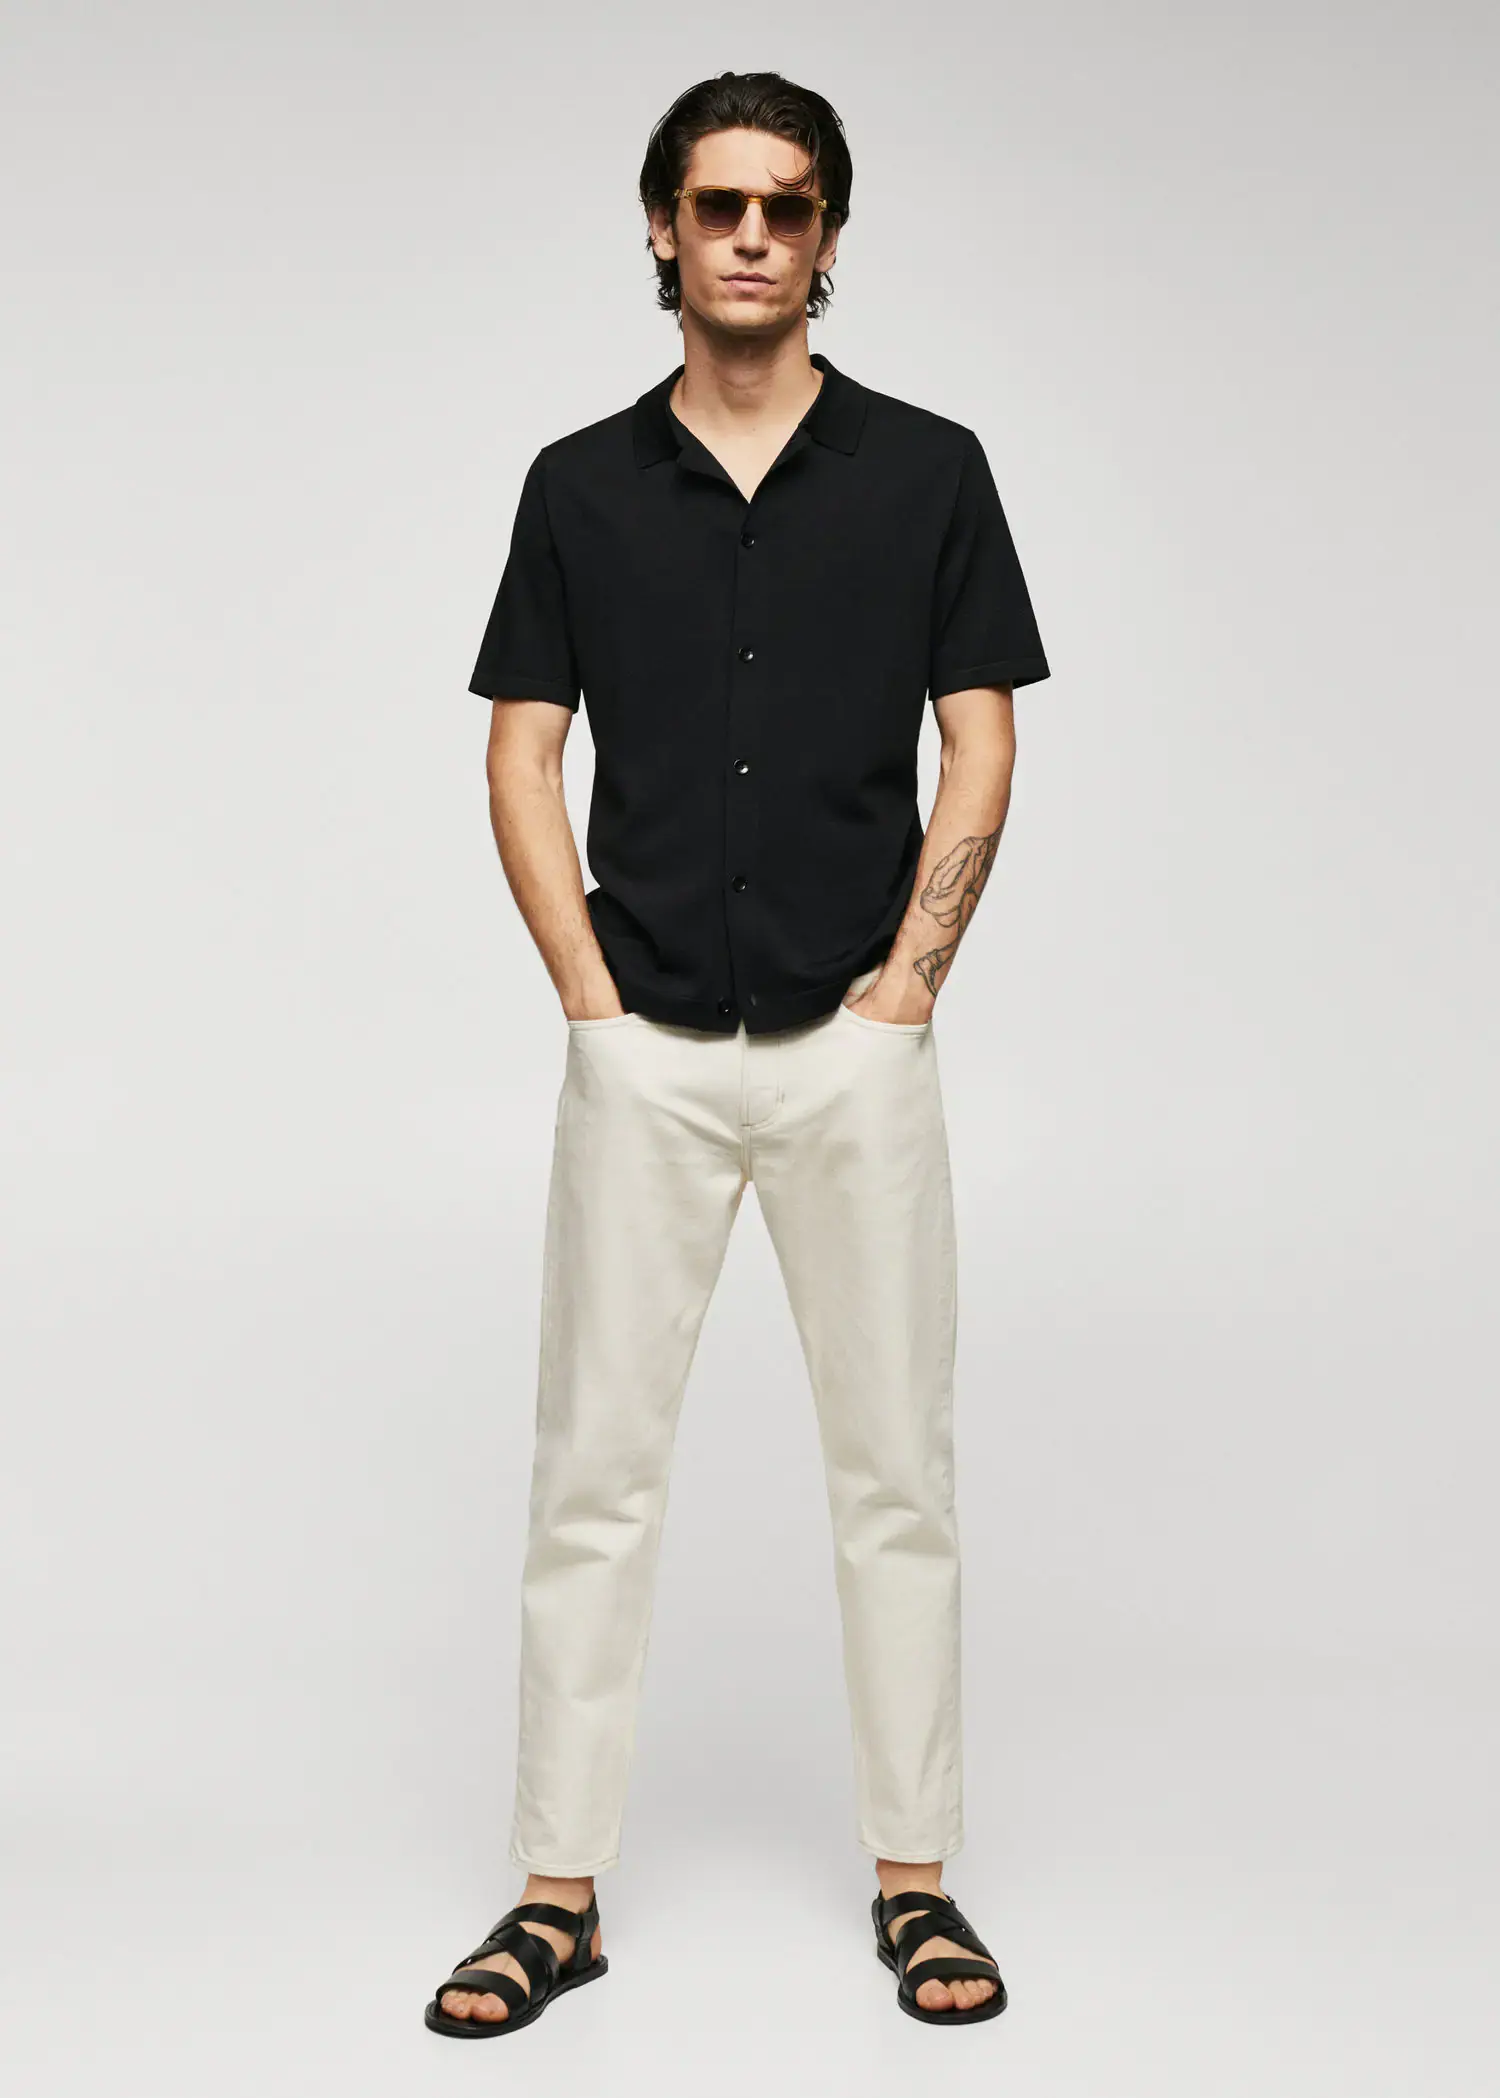 Mango Fine-knit buttoned polo shirt. a man in a black shirt and white pants. 